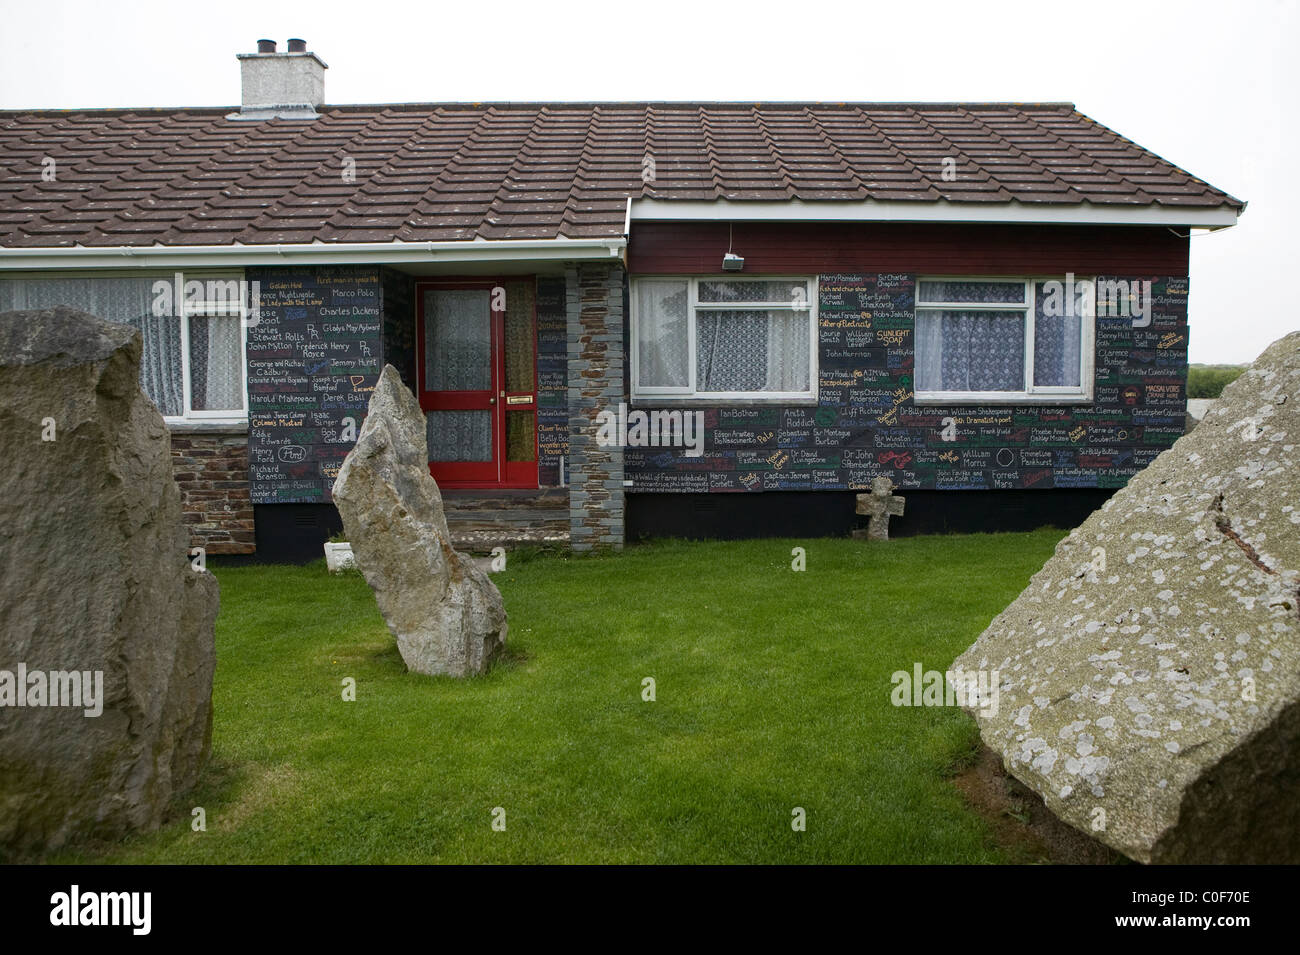 The home of Cornish Druid Ed Prynn at St Merryn where slate plaques with tributes to famous people cover the walls. Stock Photo